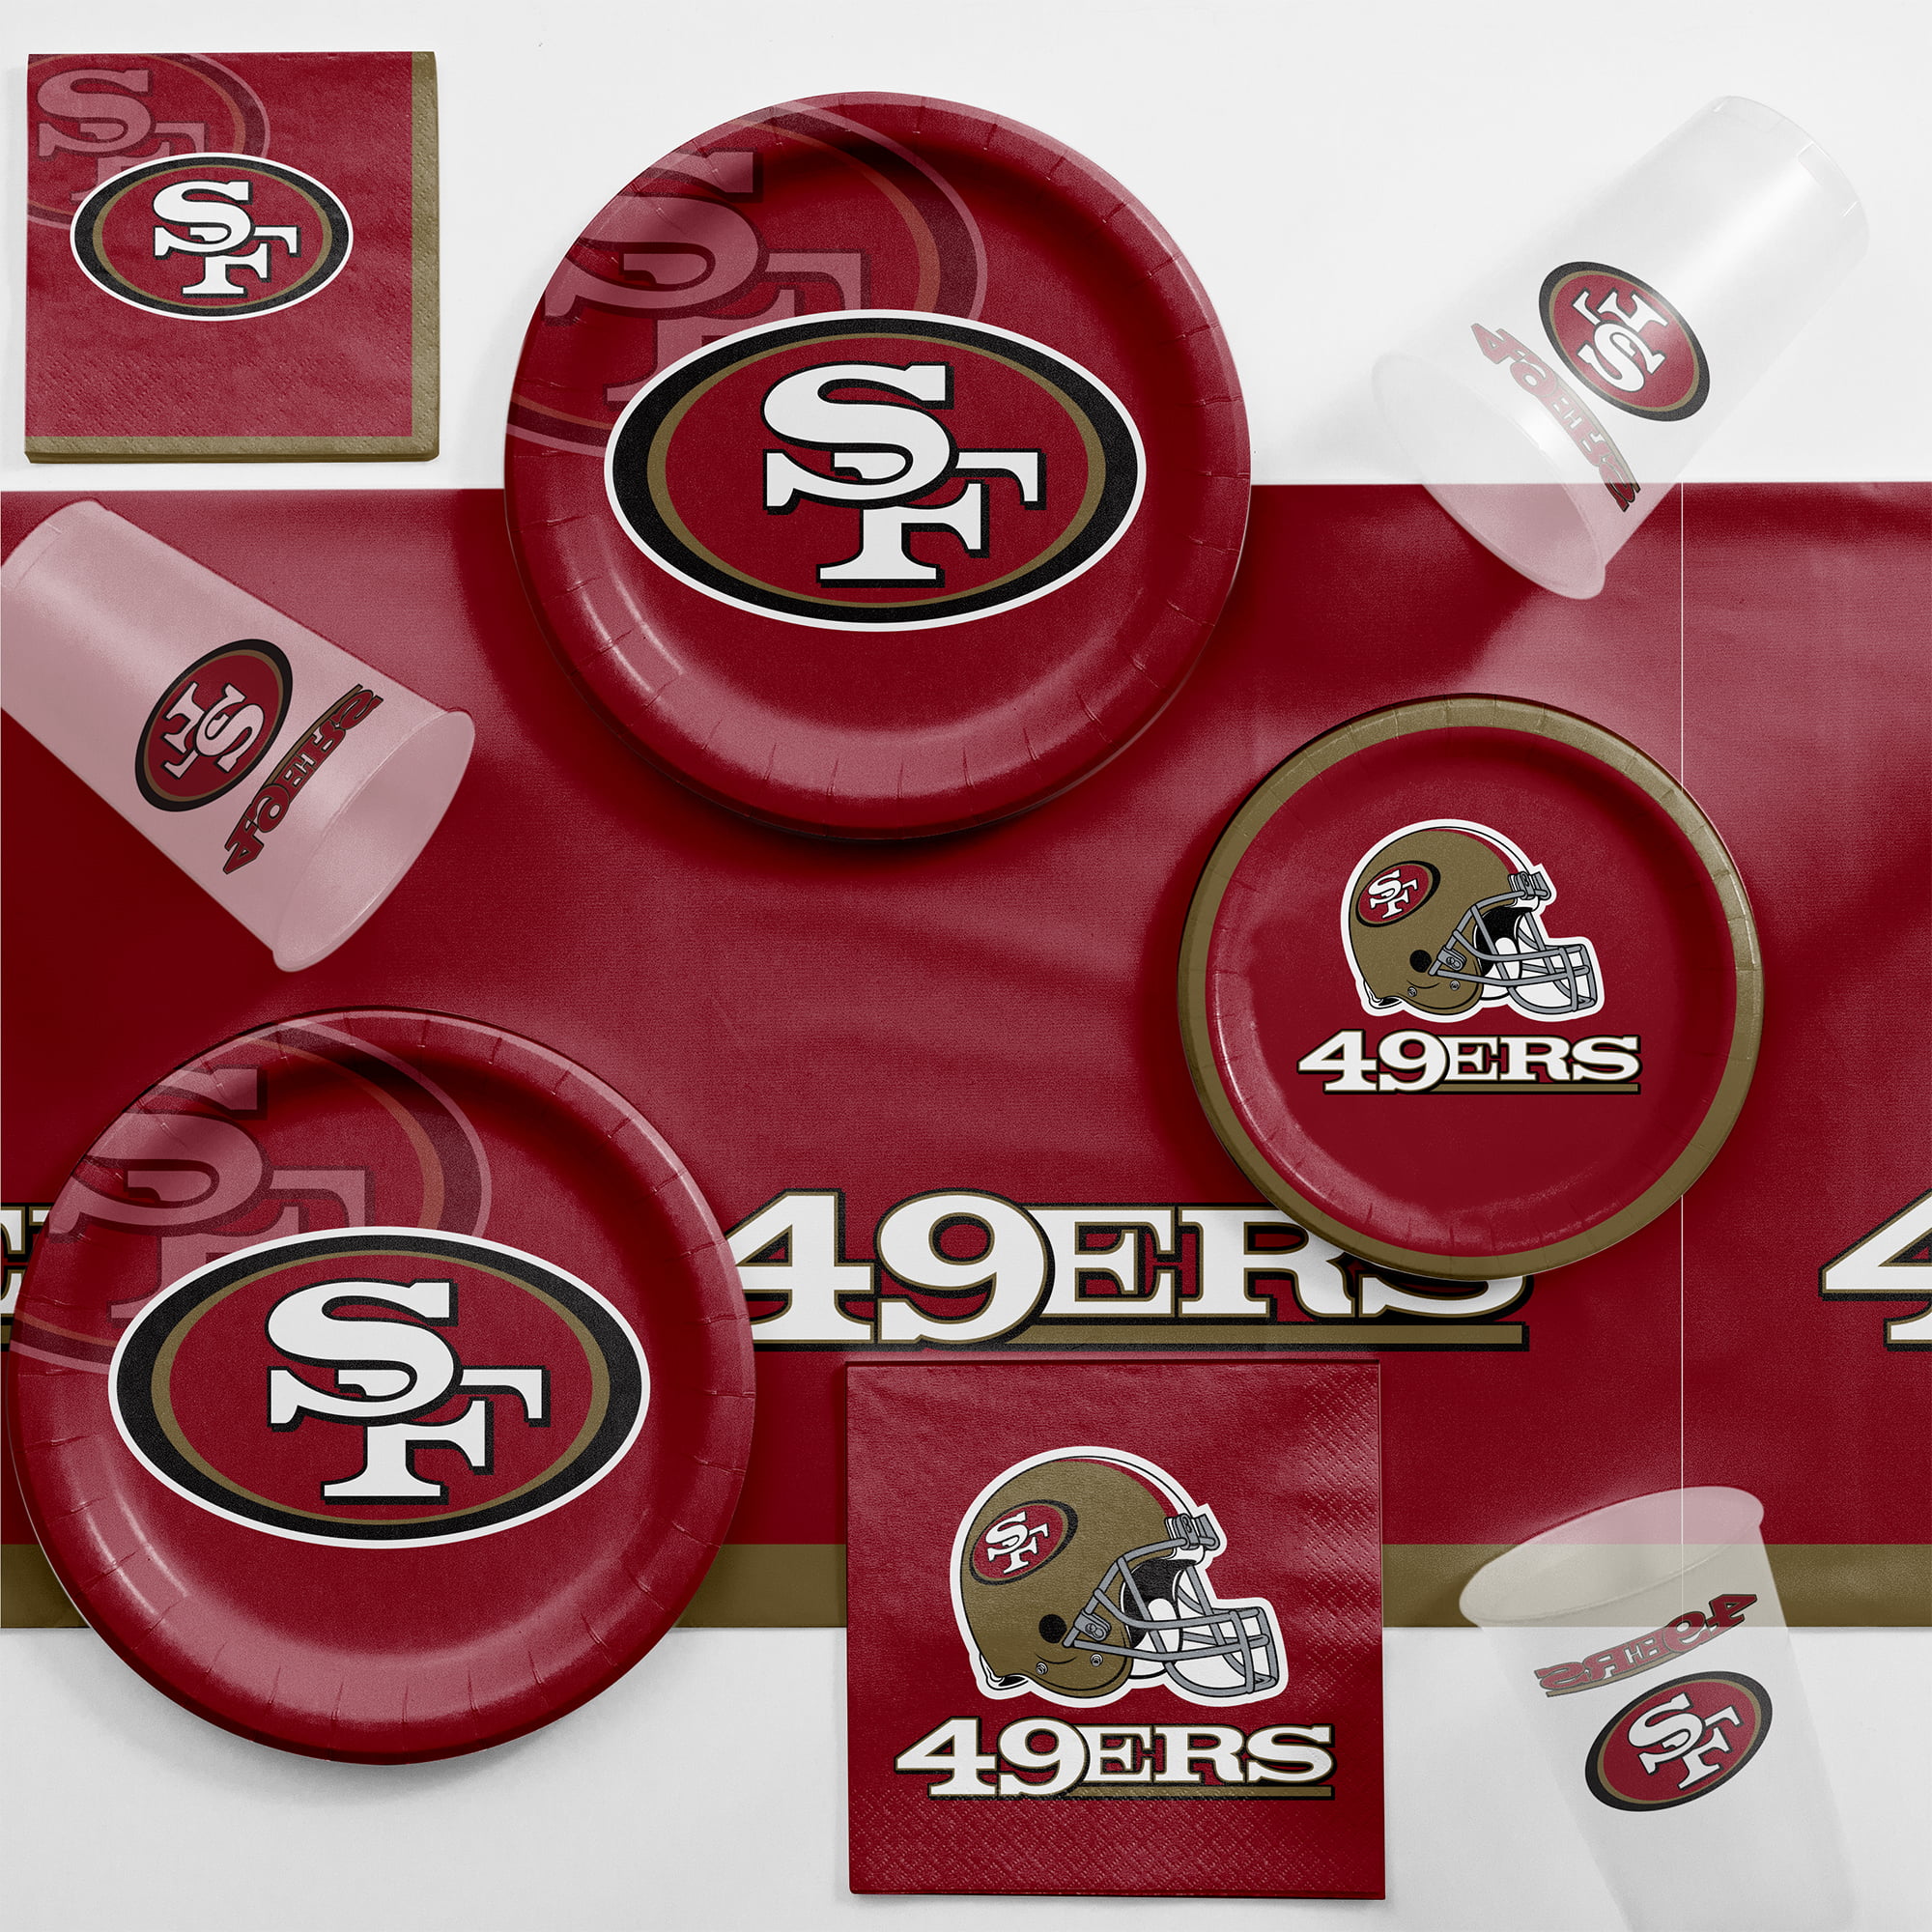 San Francisco 49ers Game Day Party Supplies Kit, Serves 8 Guests